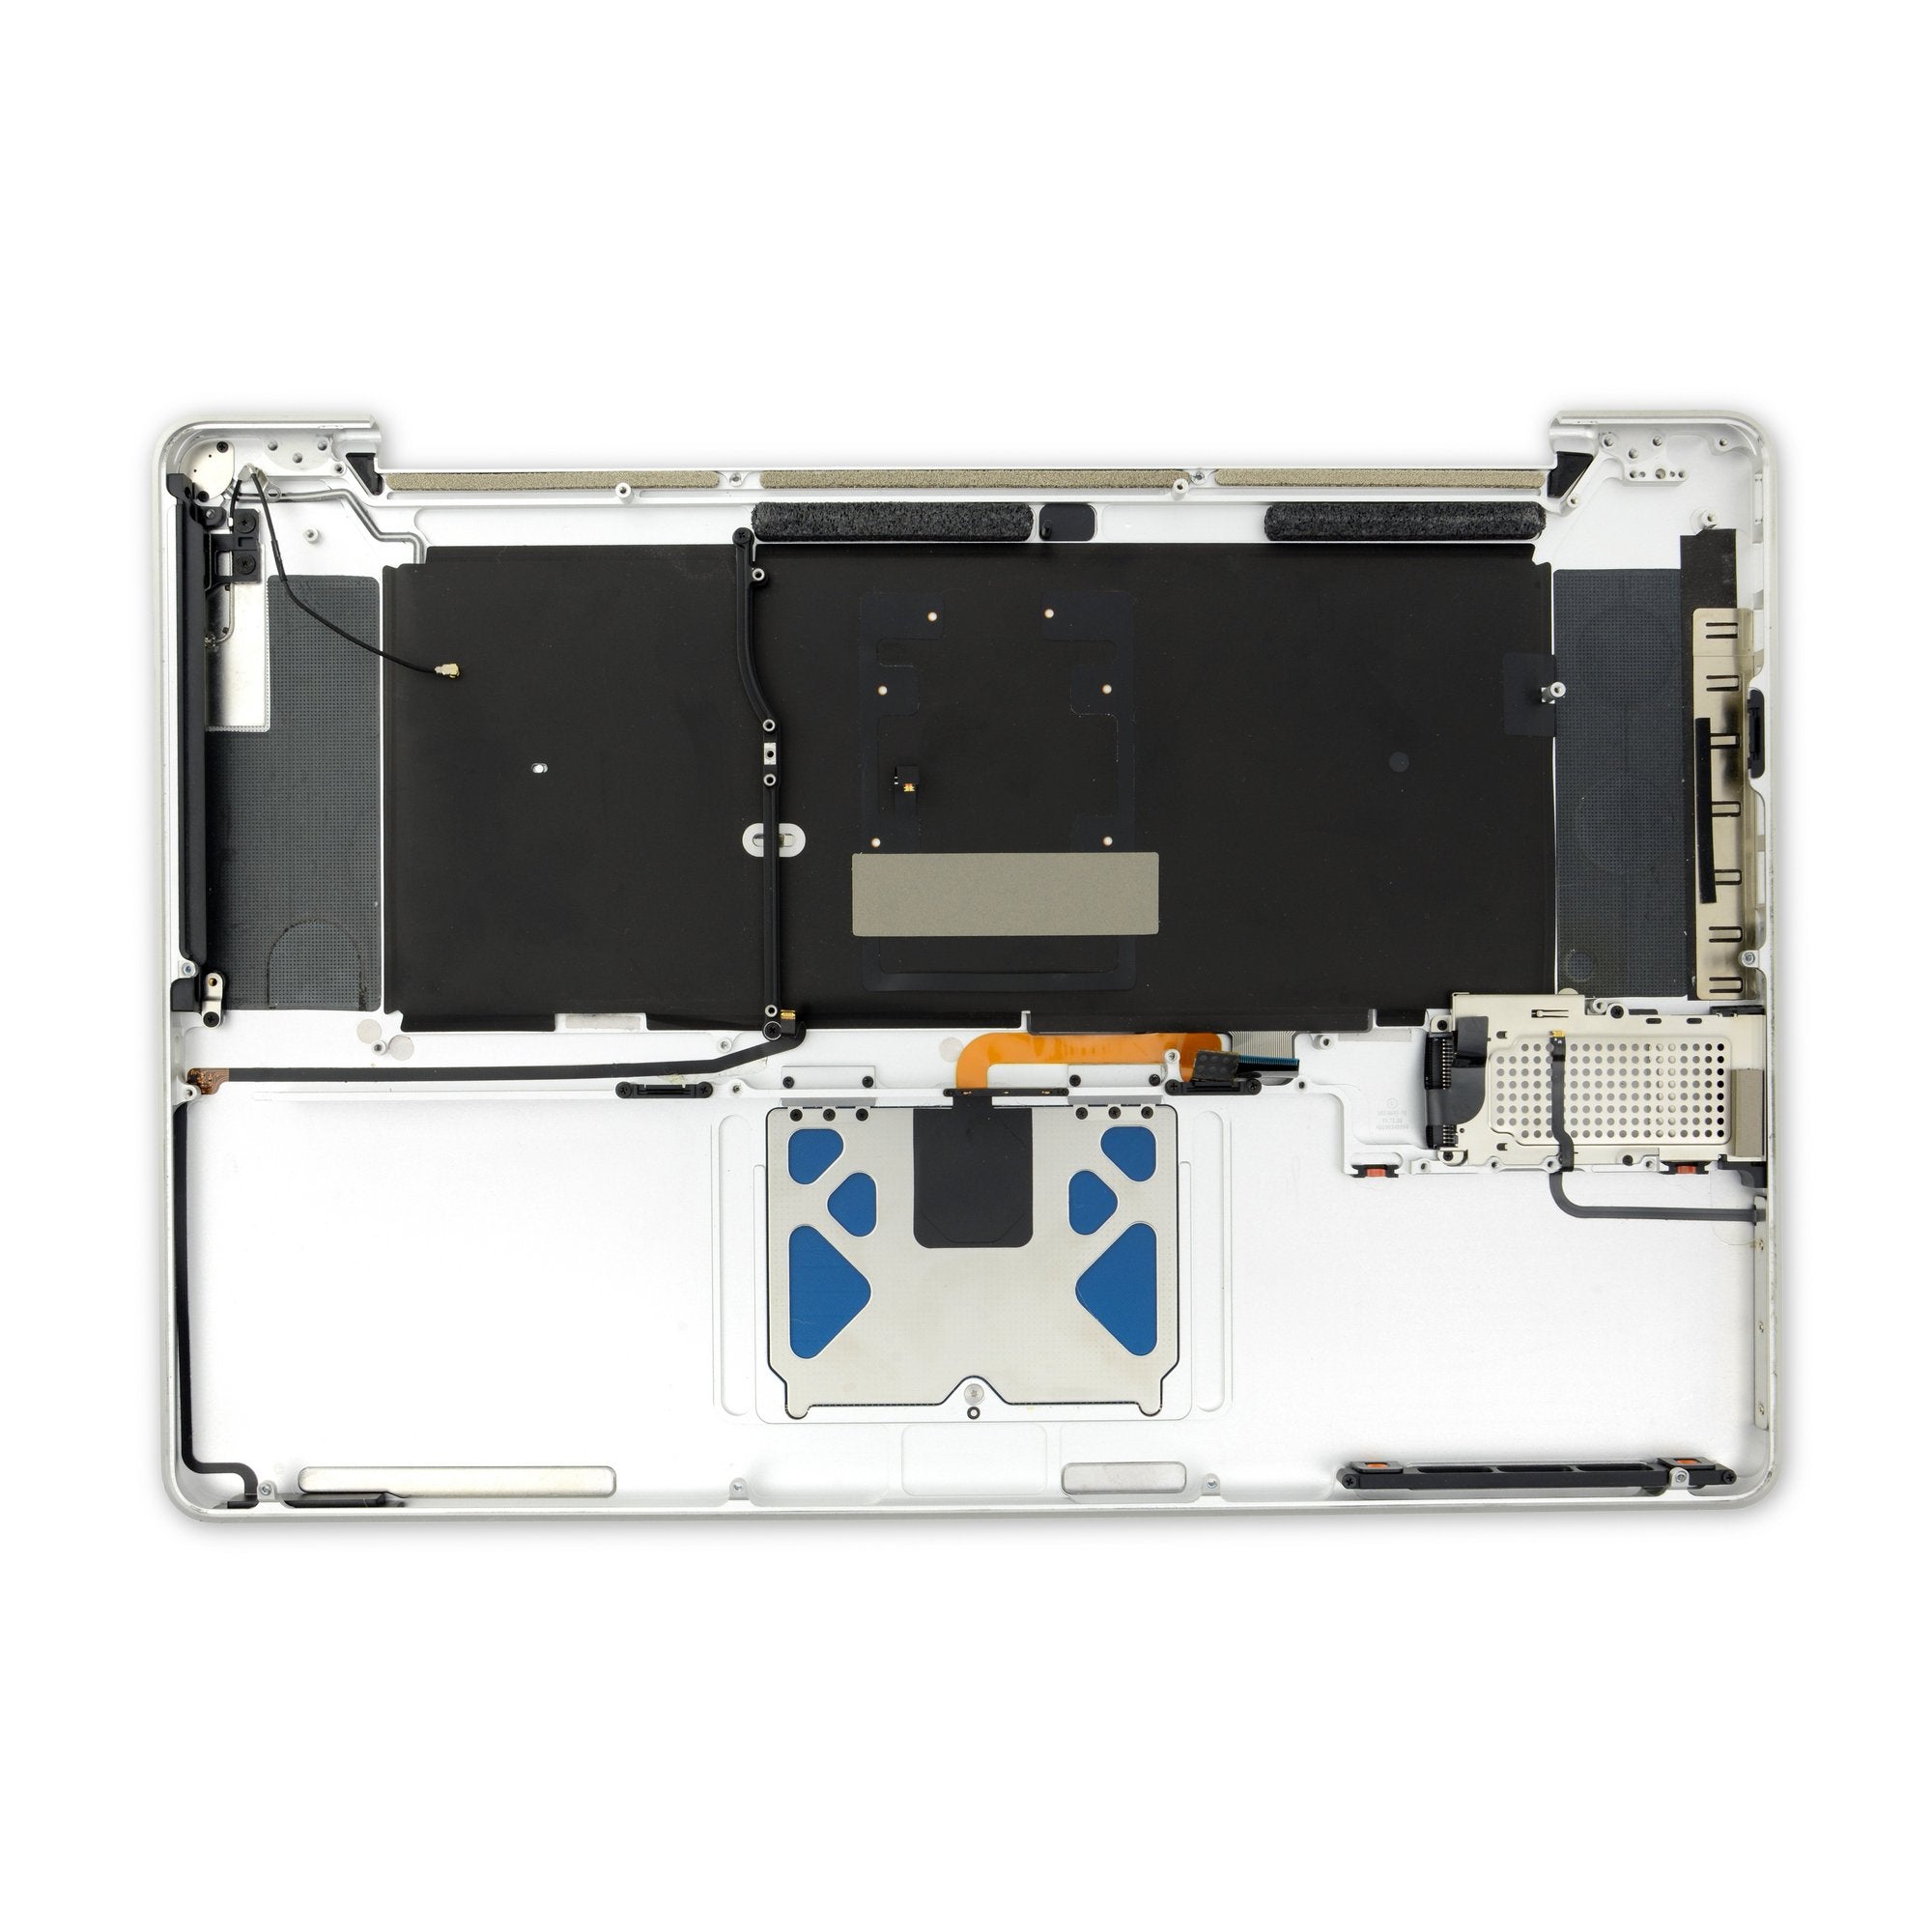 MacBook Pro 17" Unibody (Late 2011) Upper Case Used, B-Stock With Trackpad